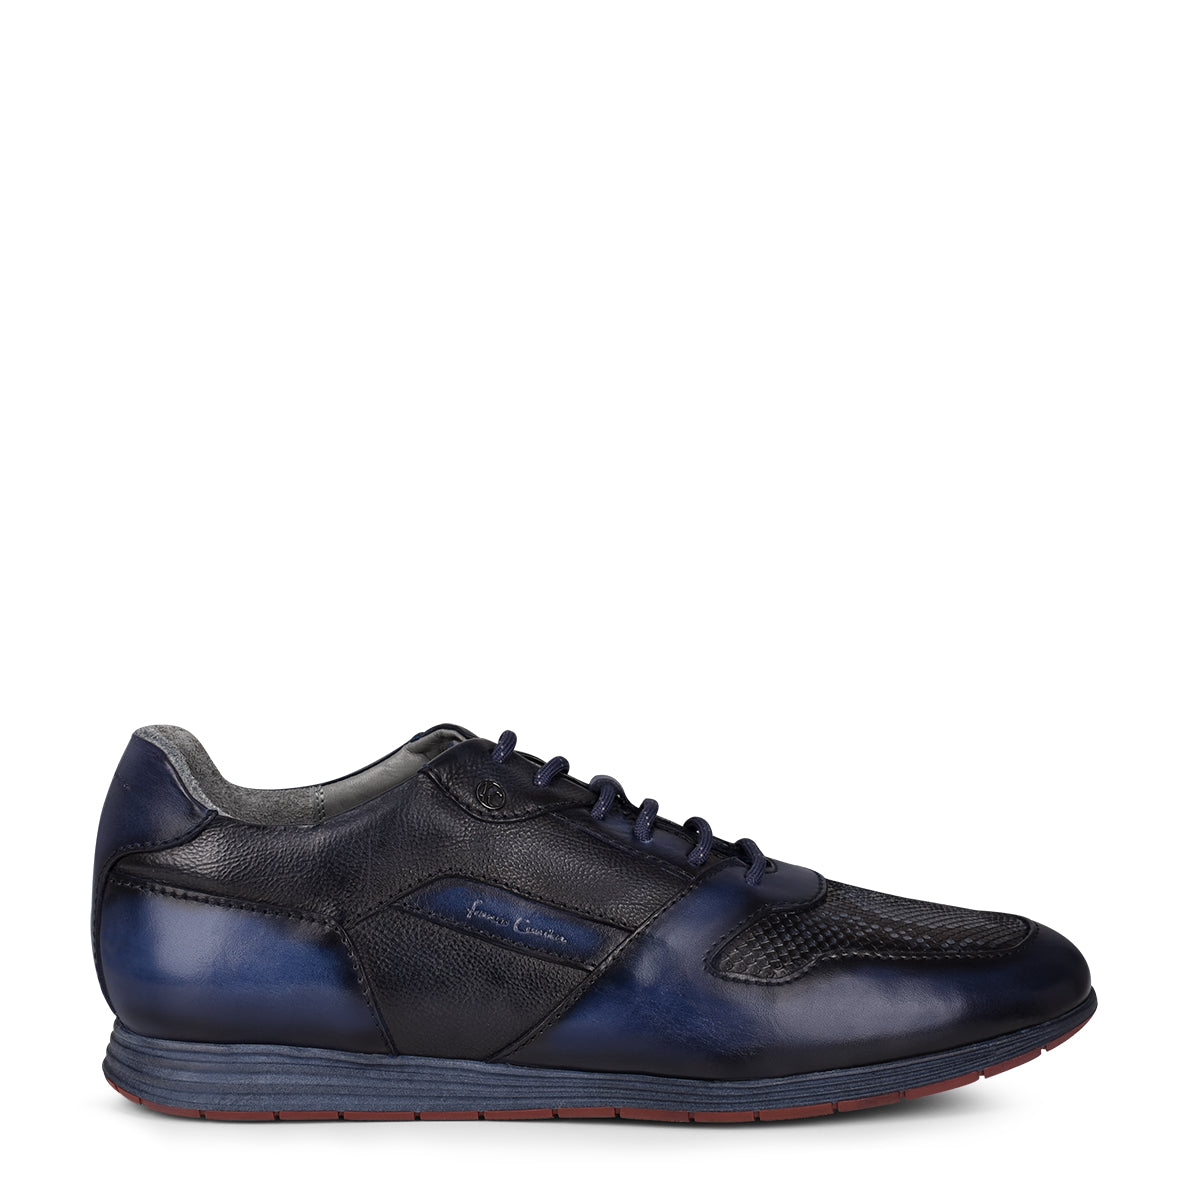 Hand-painted blue montecarlo leather sneakers